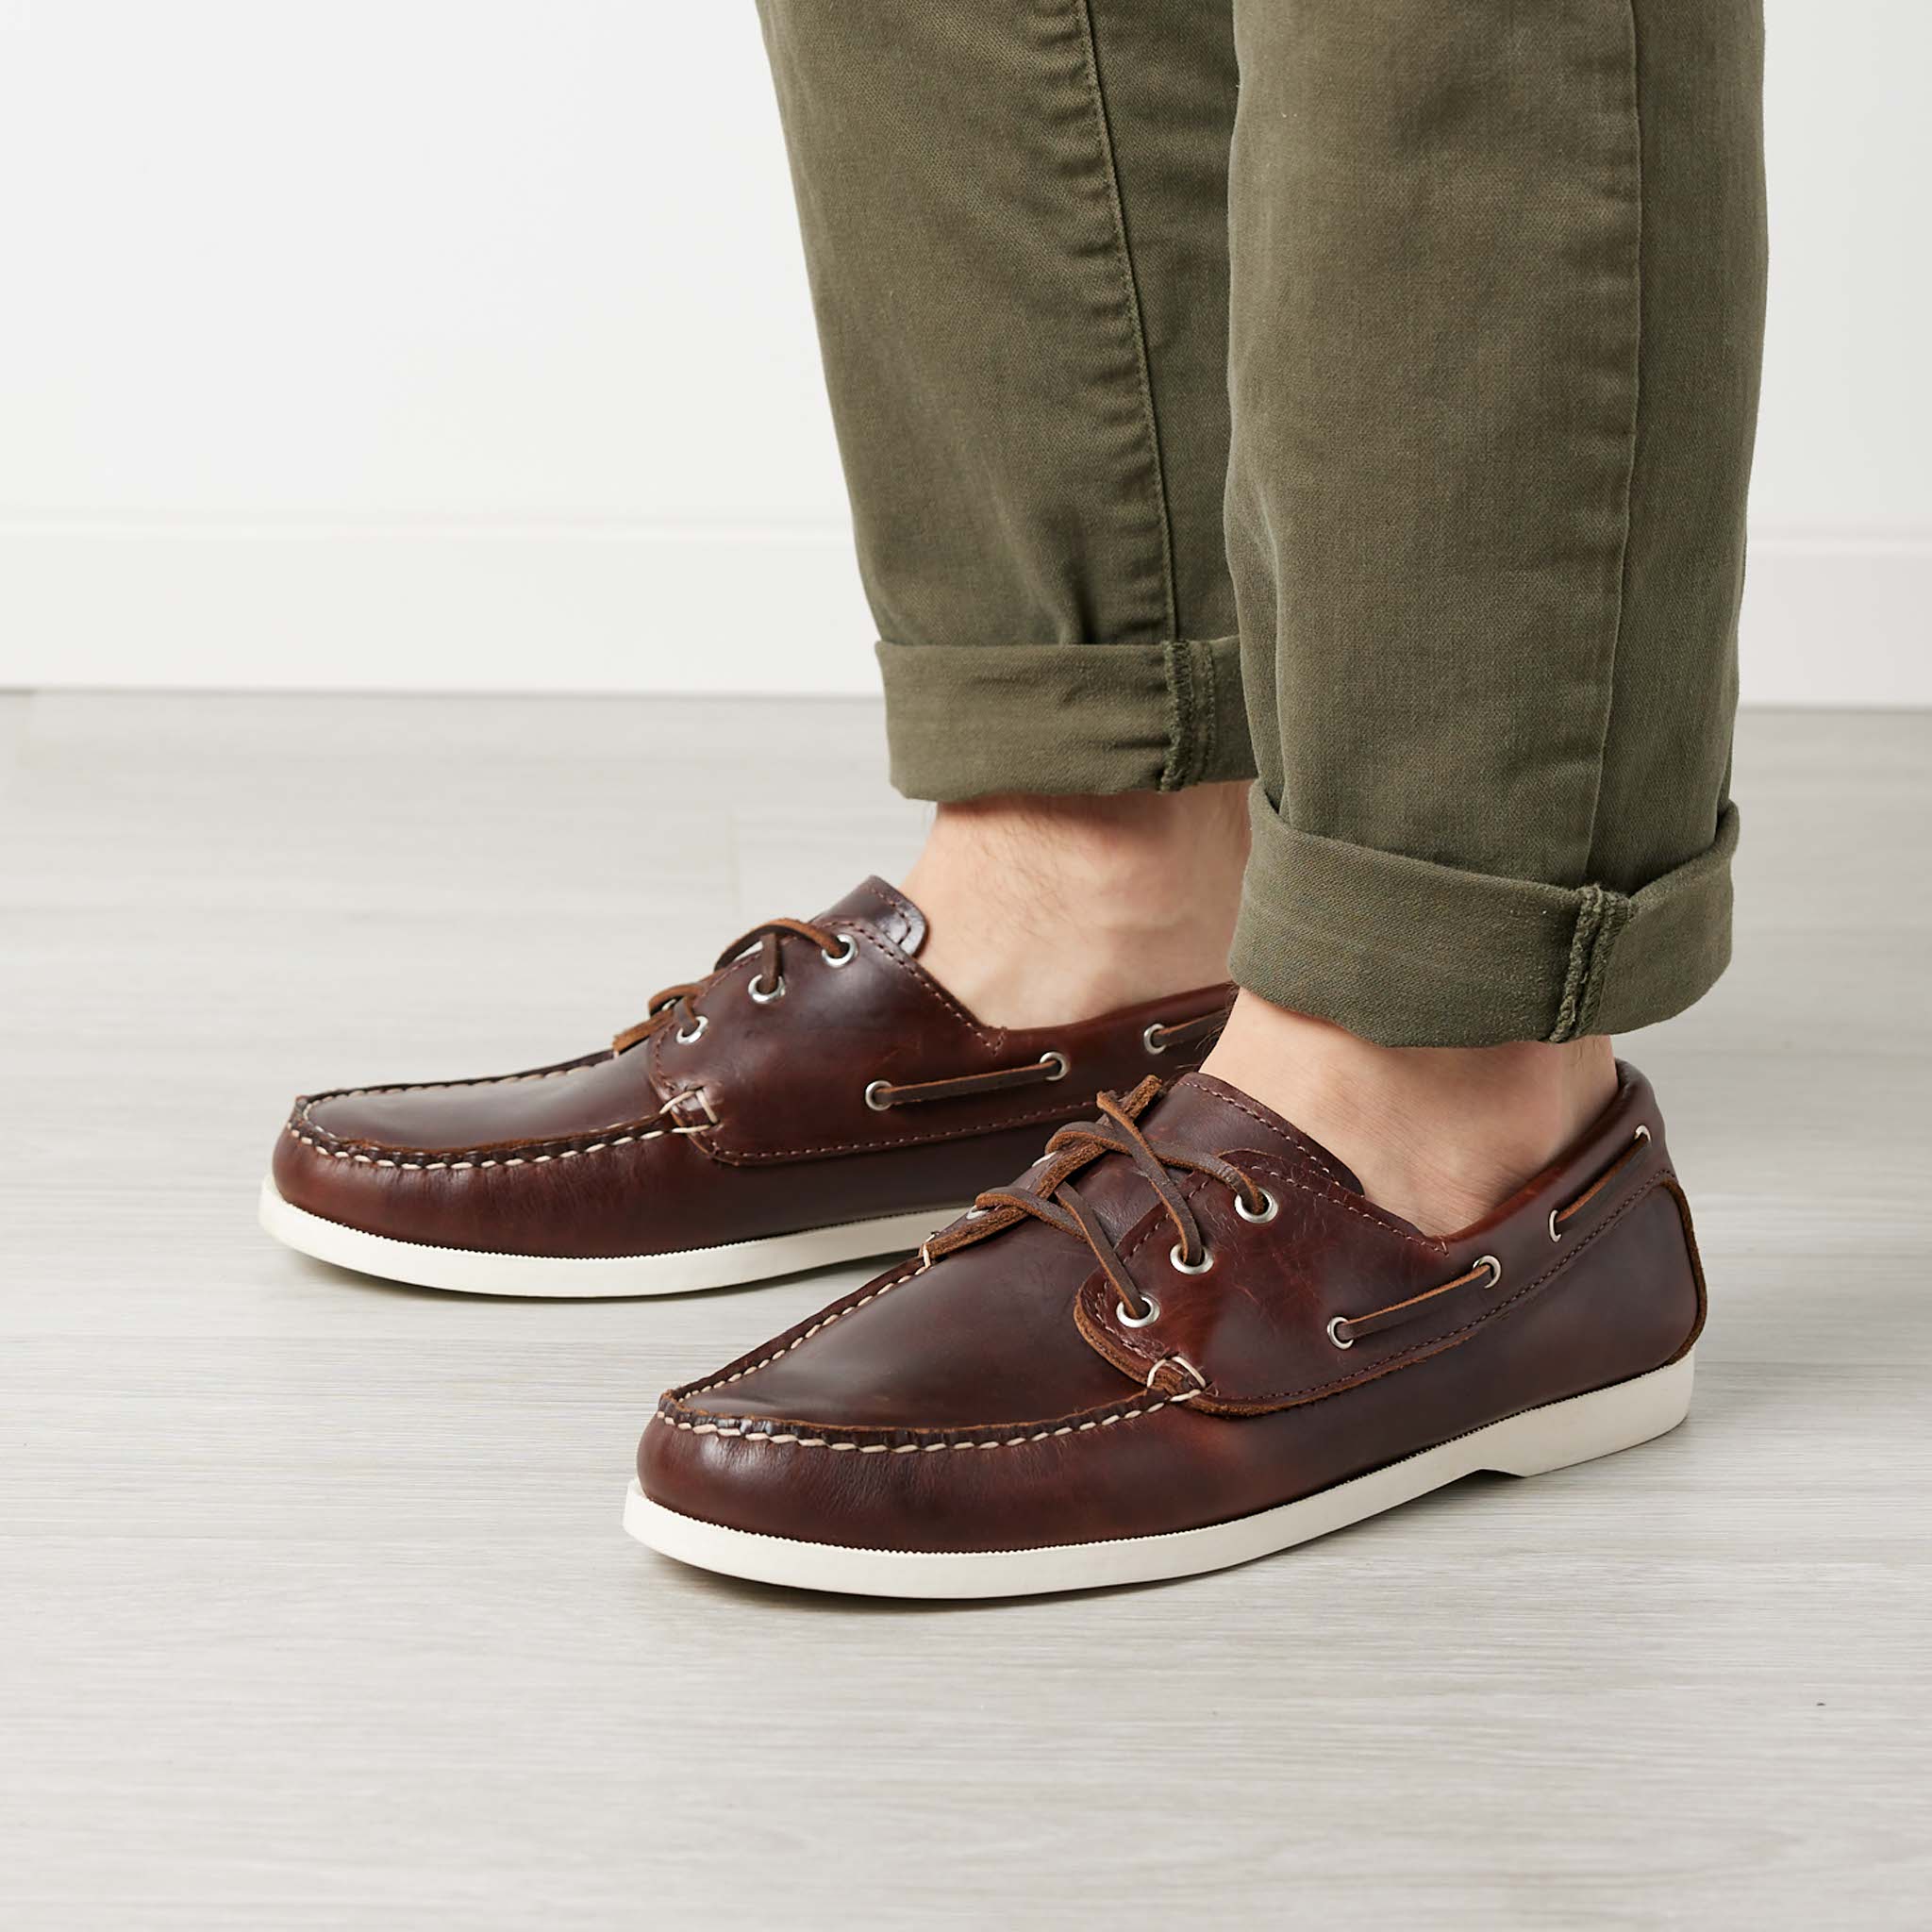 Mens Boat Shoes for Different Occasions